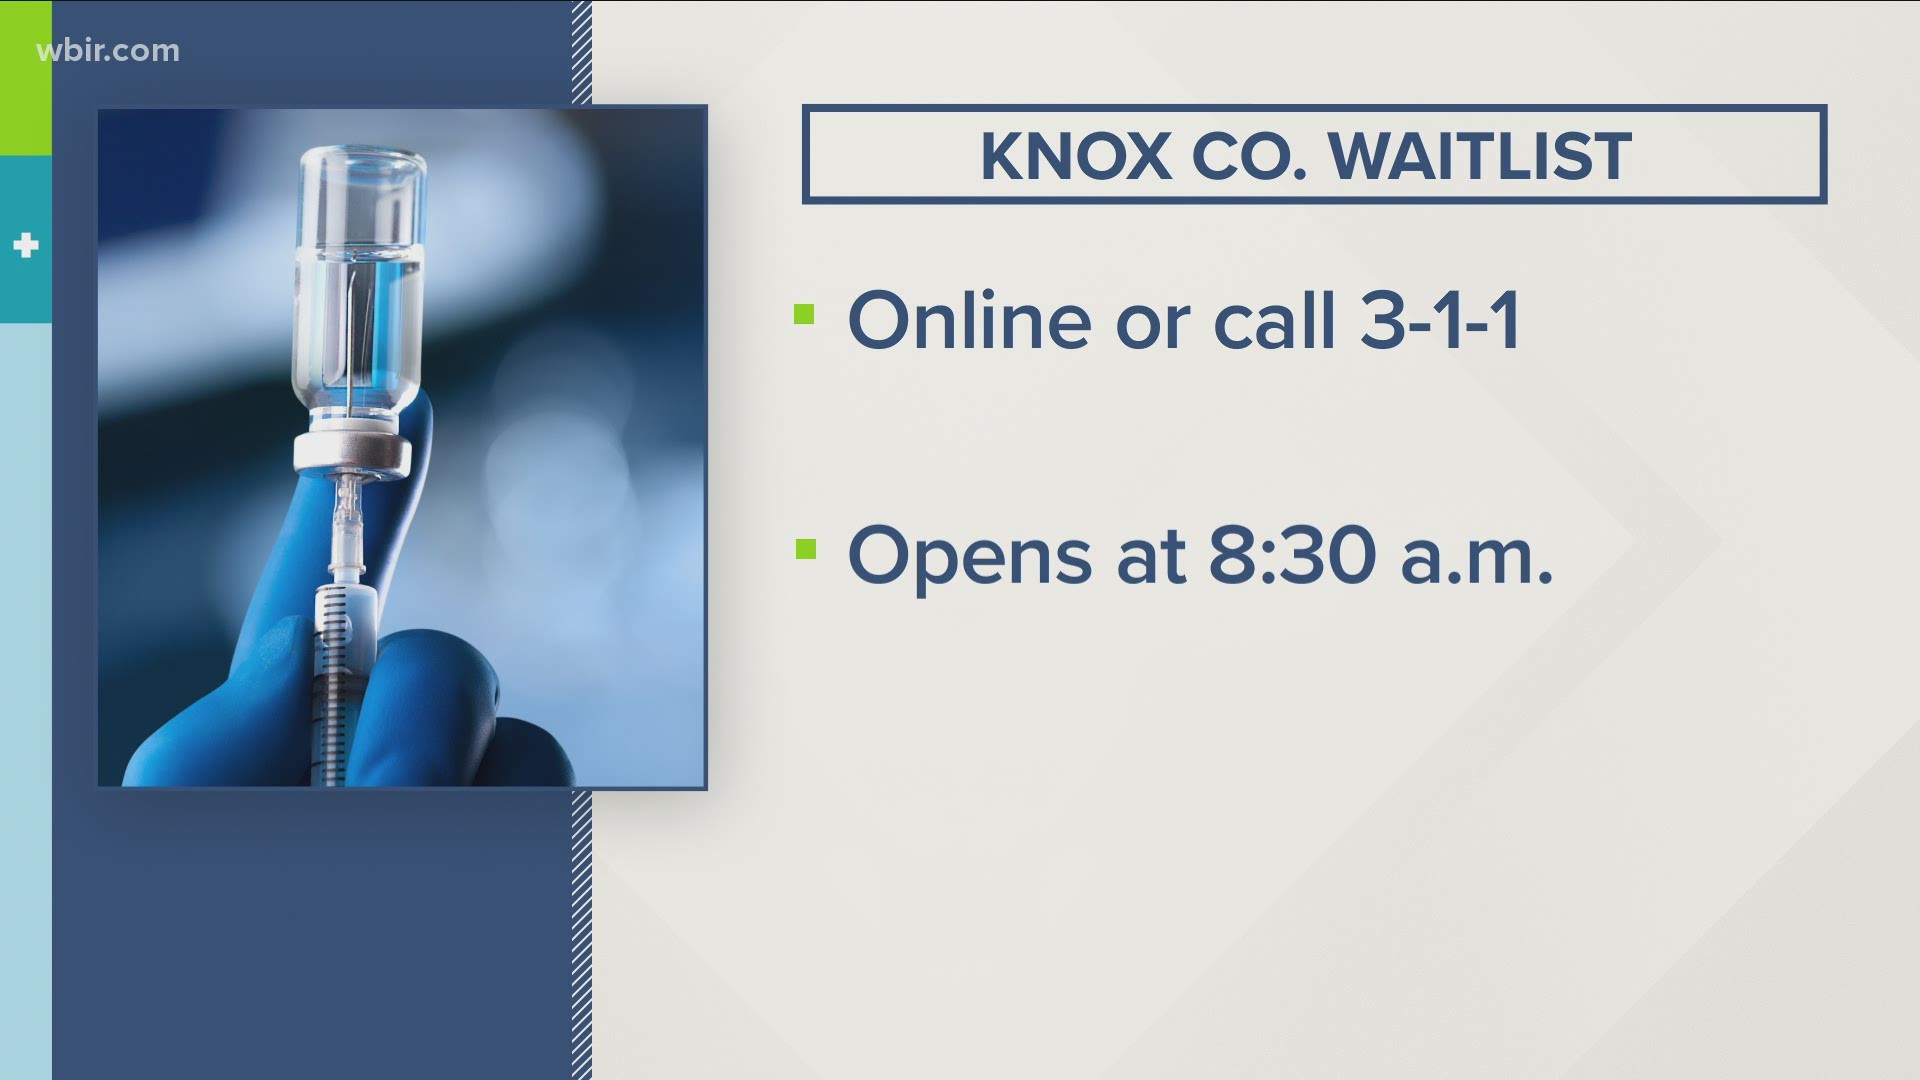 It opens at 8:30 a-m. People eligible for the vaccine can sign up online, call 311 or call the Knox County Health Department directly.